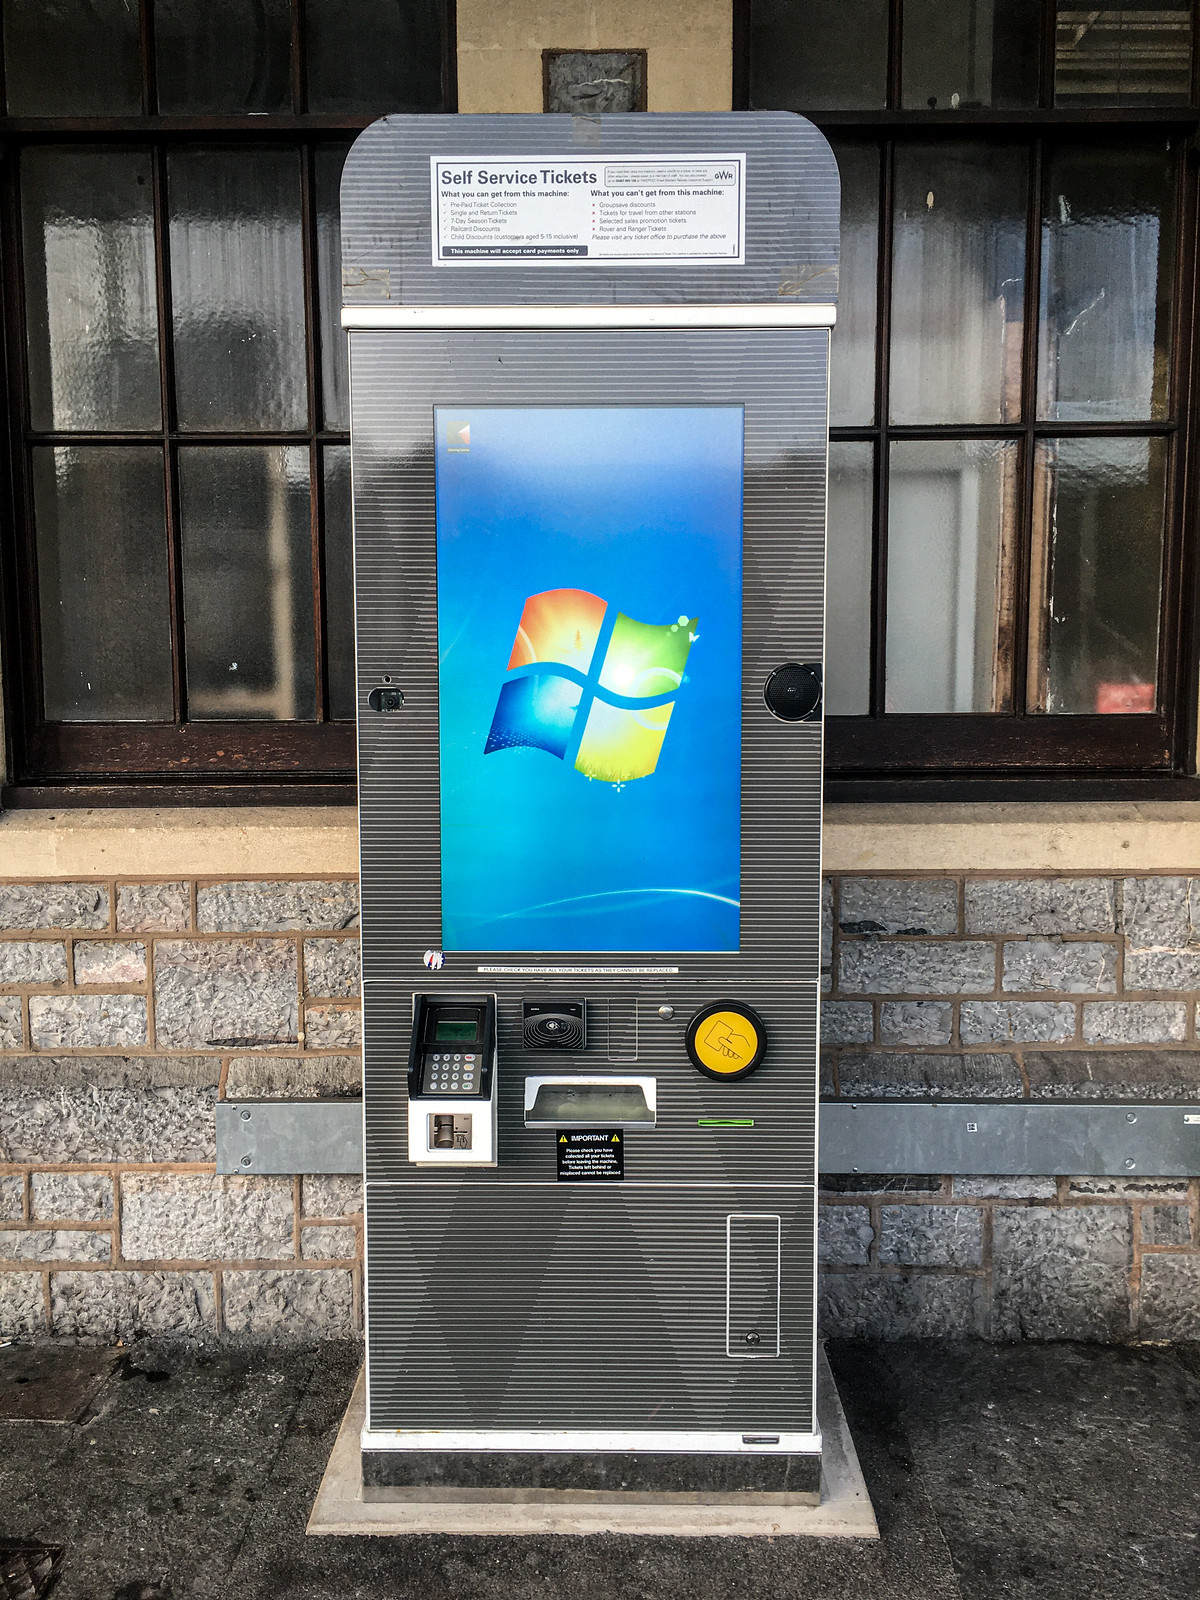 Self service tickets at GWR Exeter means installing Windows